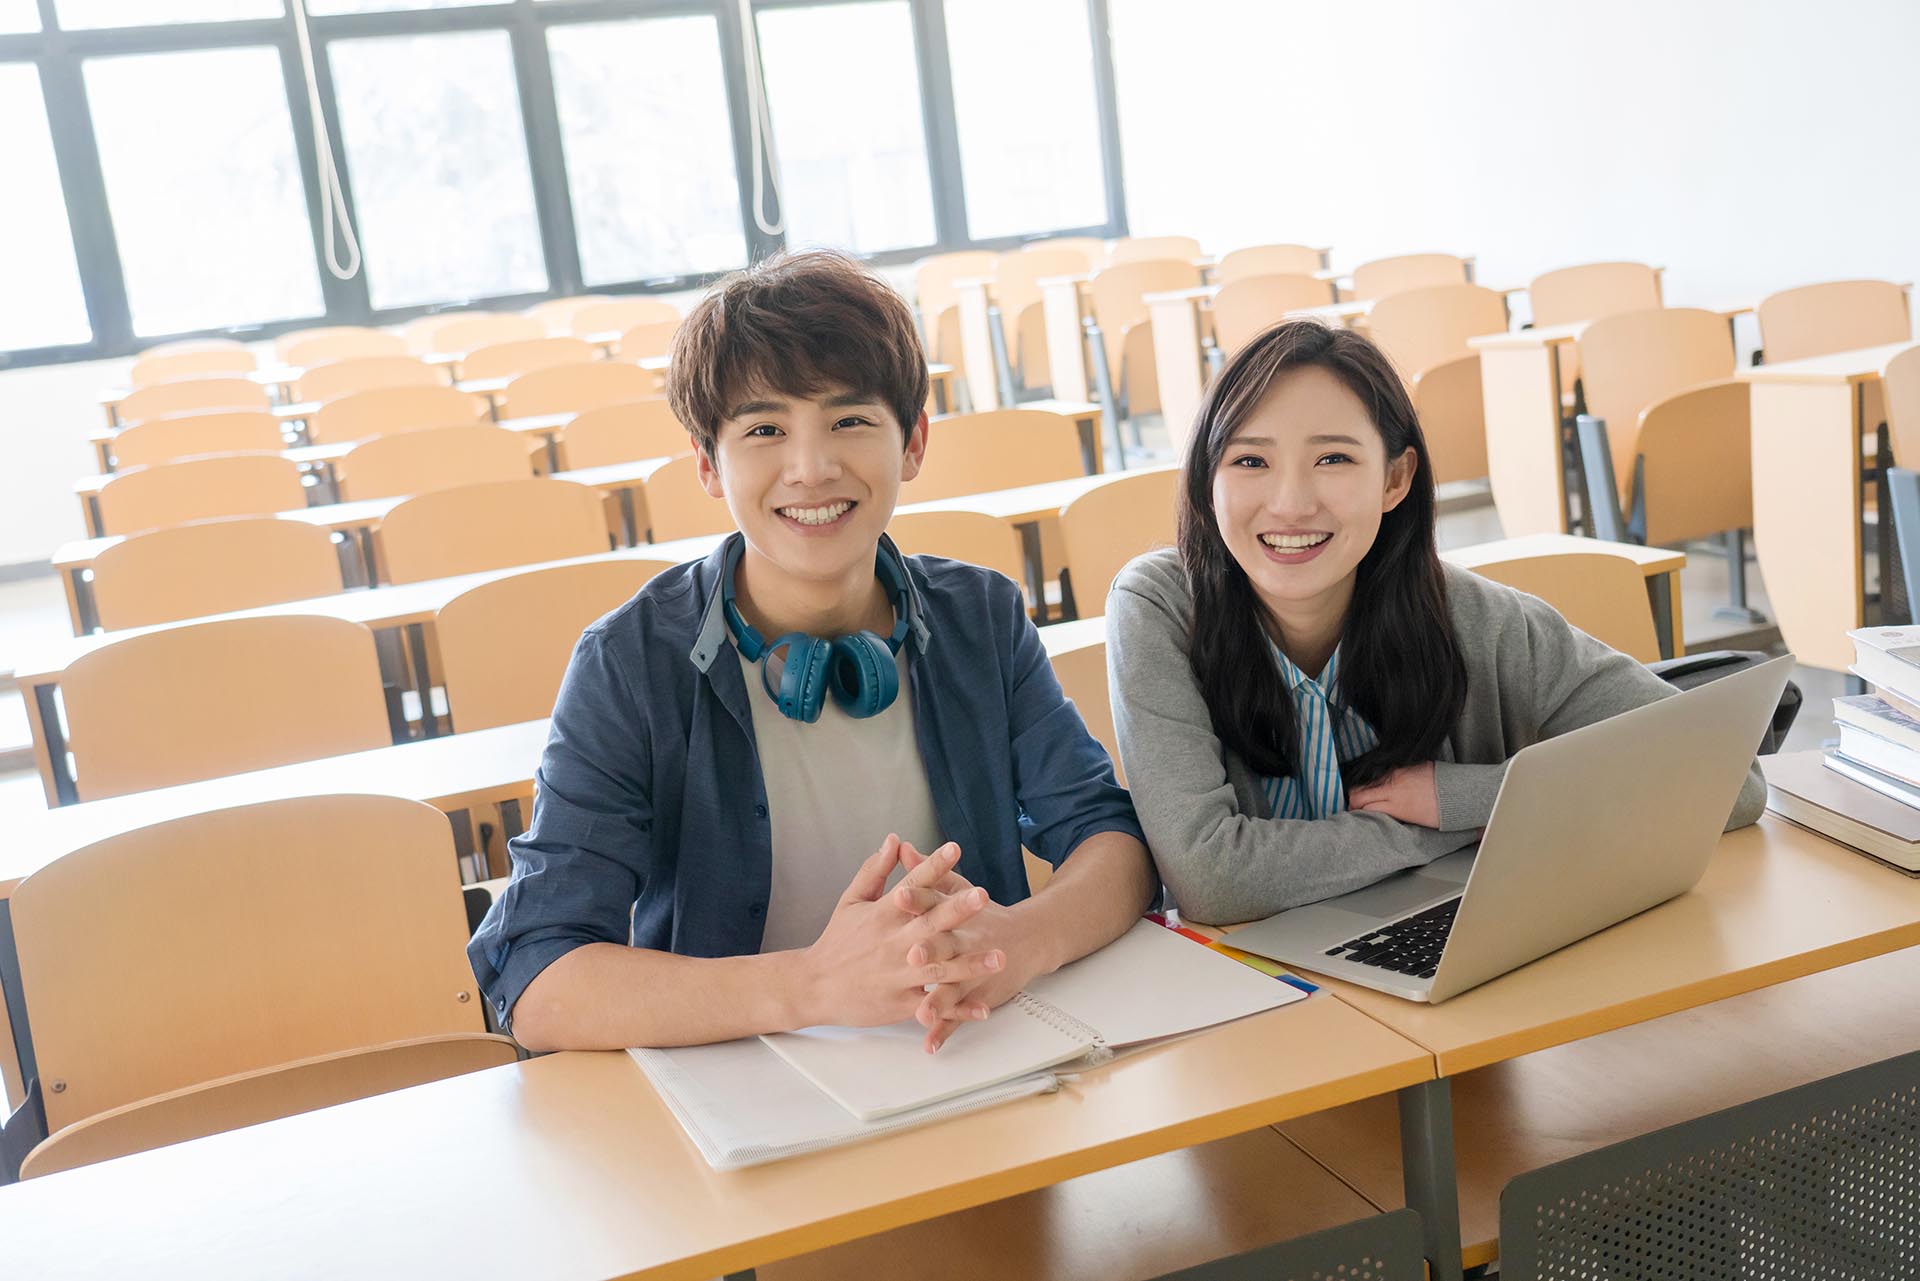 College students' learning in the classroom